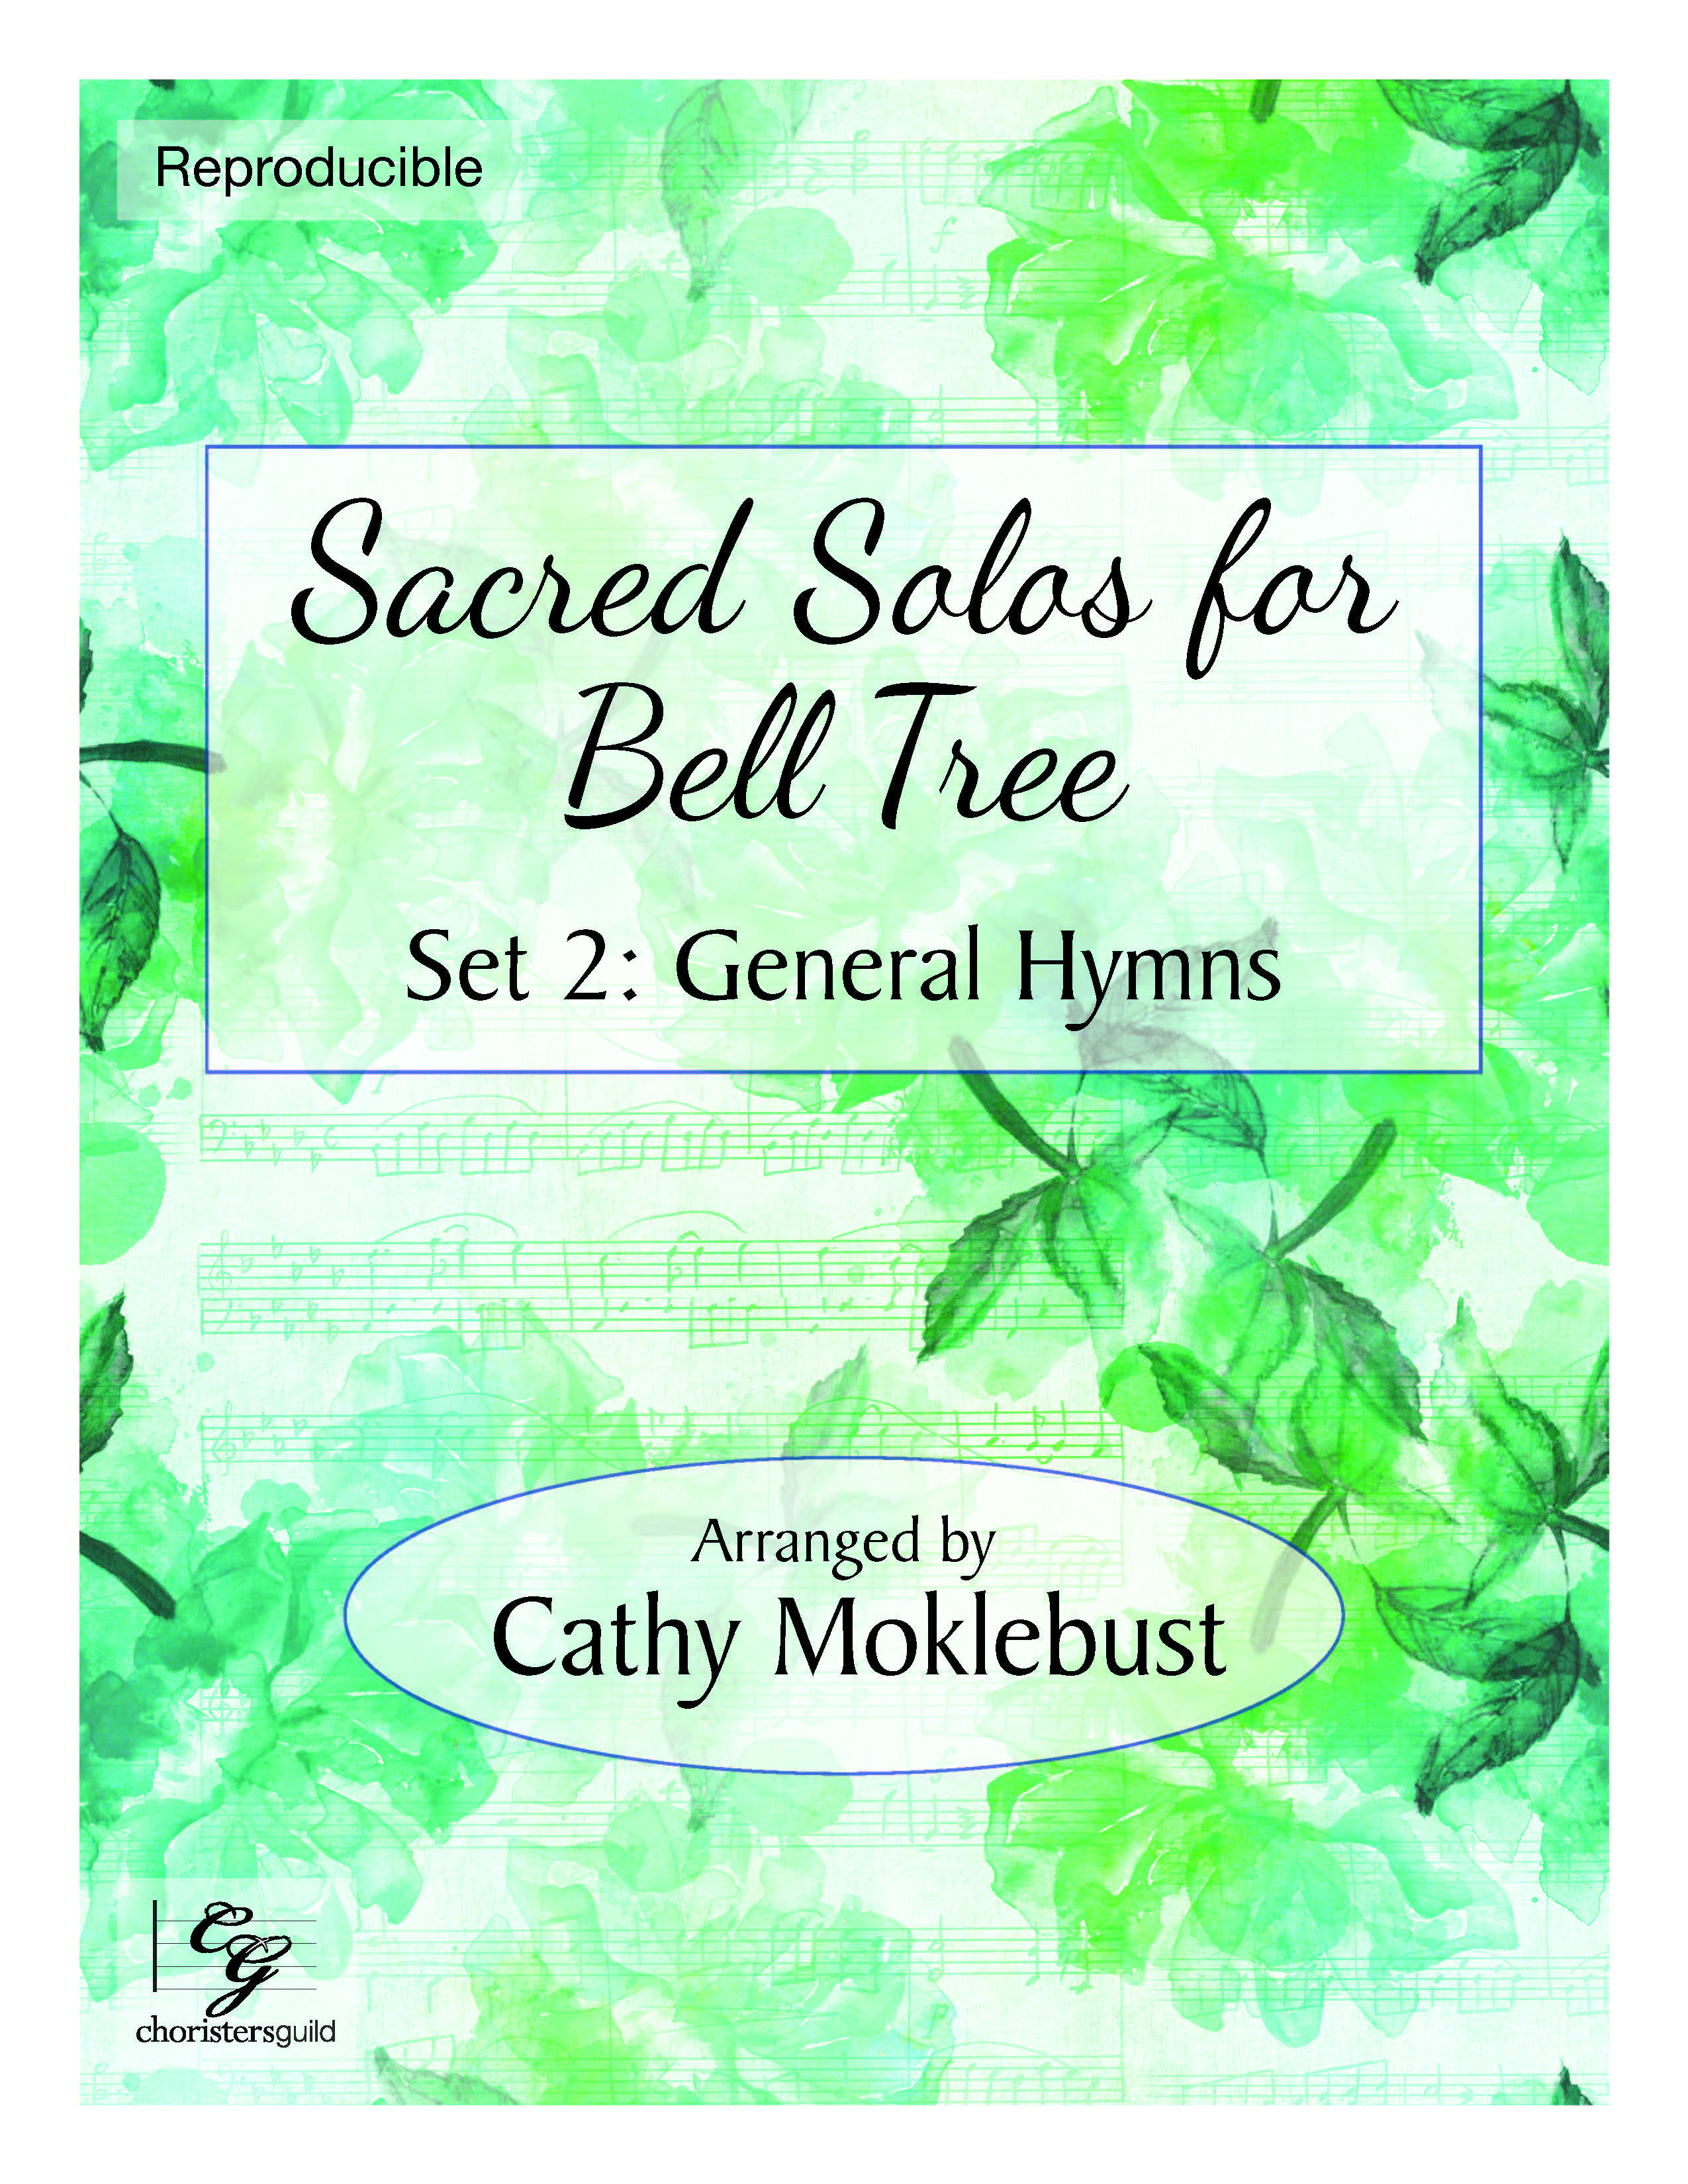 Sacred Solos for Bell Tree, Set 2 General Hymns - Solo 